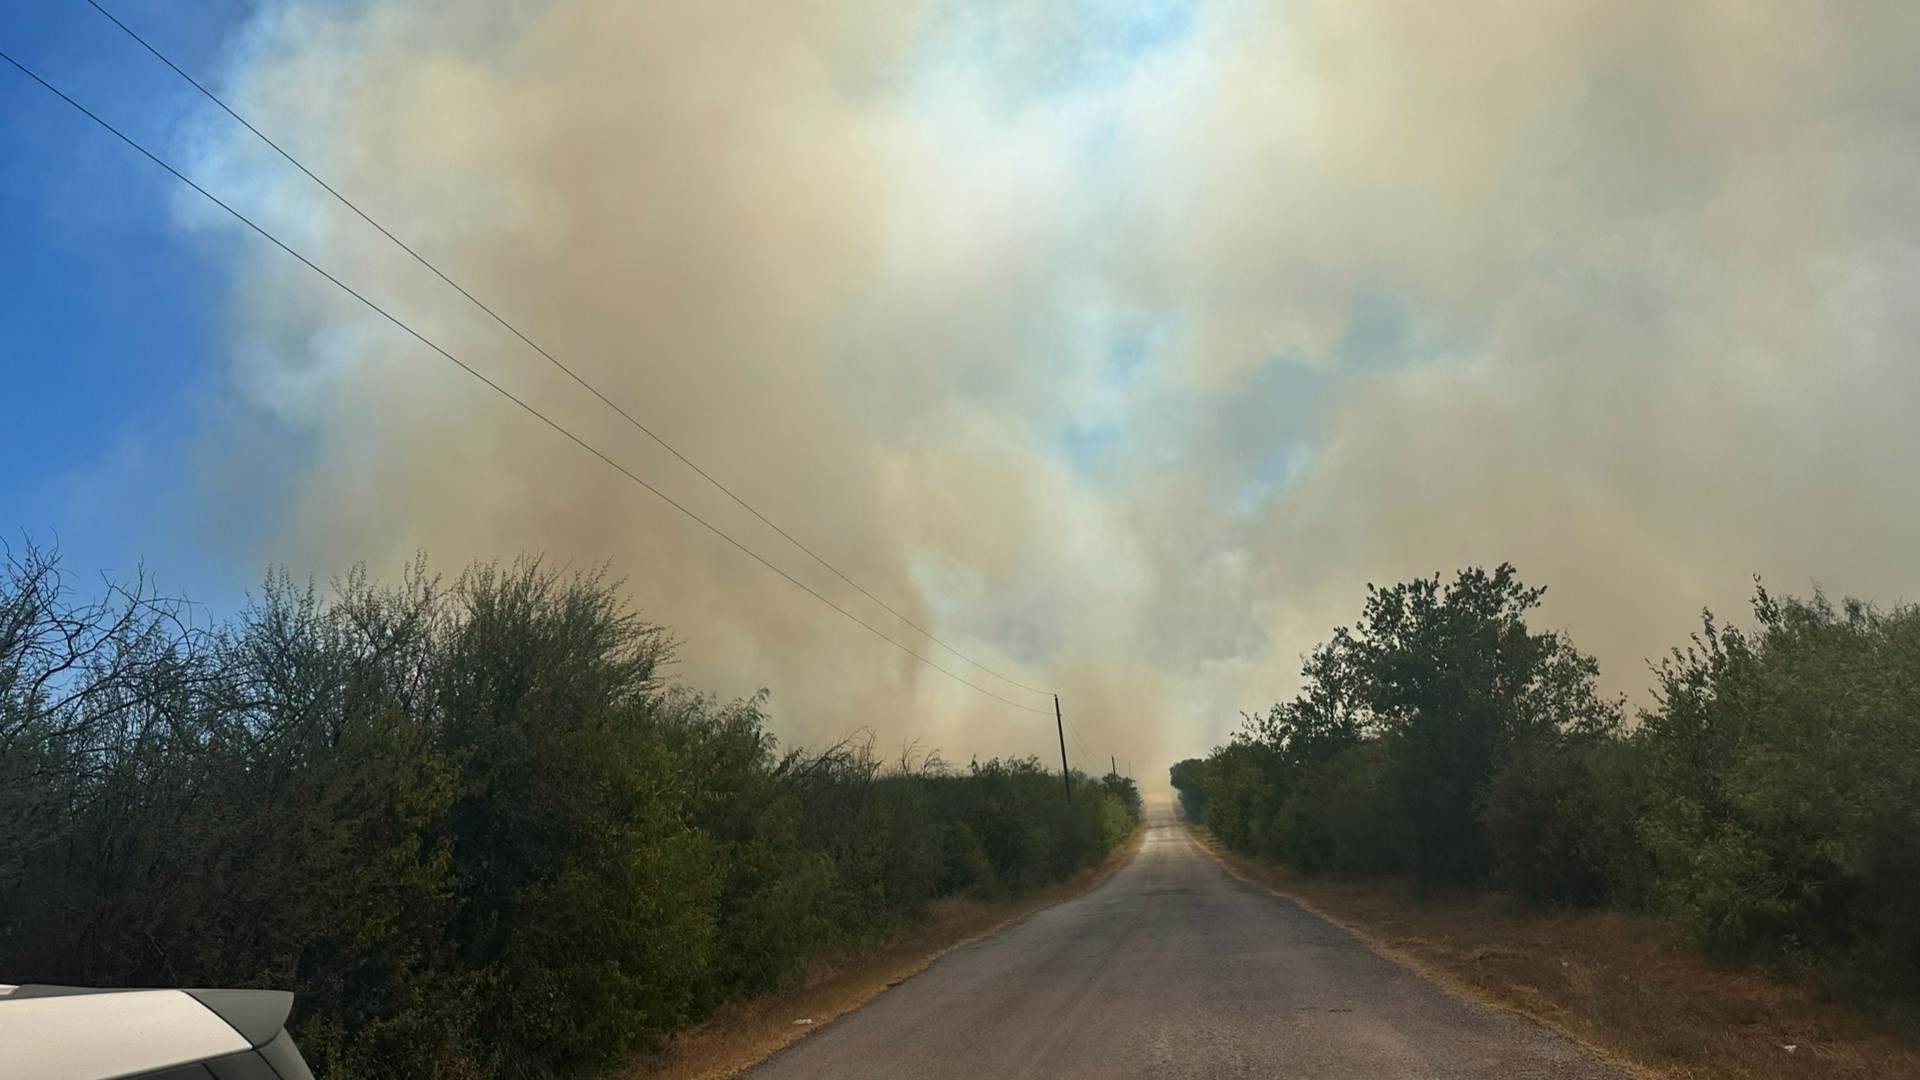 At around 3:30 p.m., the Caldwell County Sheriff’s Office said the fire was burning off Dickerson Road, southwest of Lockhart.